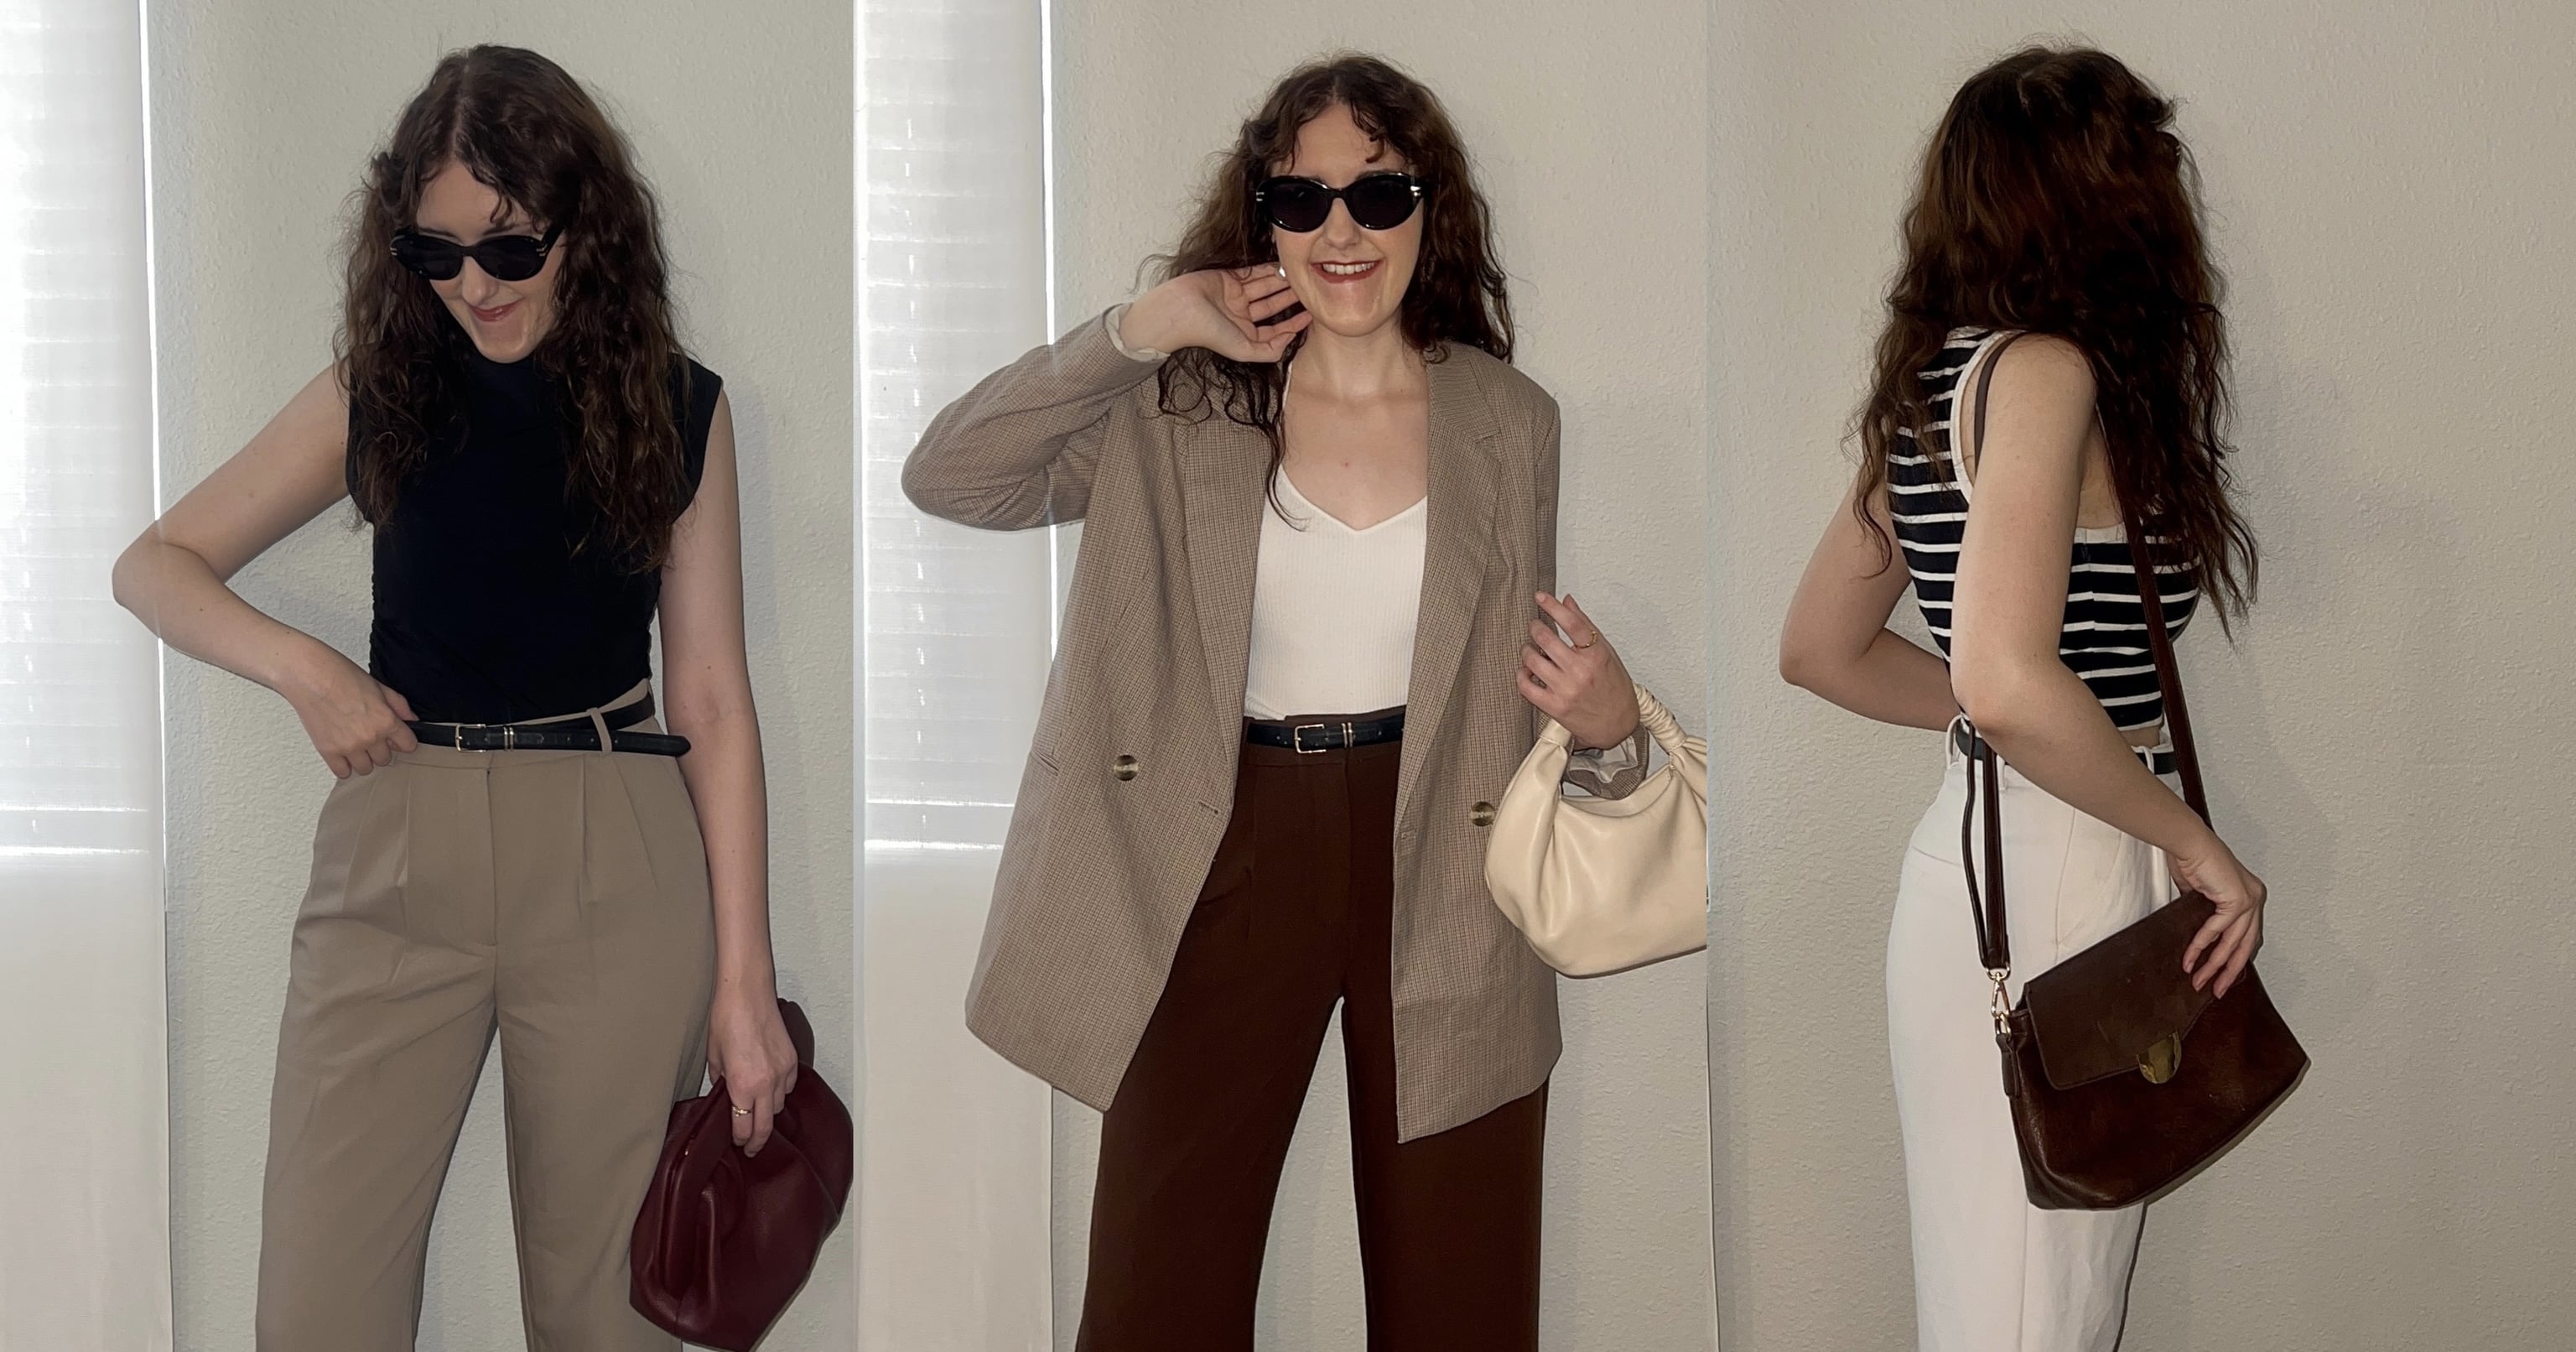 Abercrombie Tailored Pant: How to Style Them for the Office - LIFE